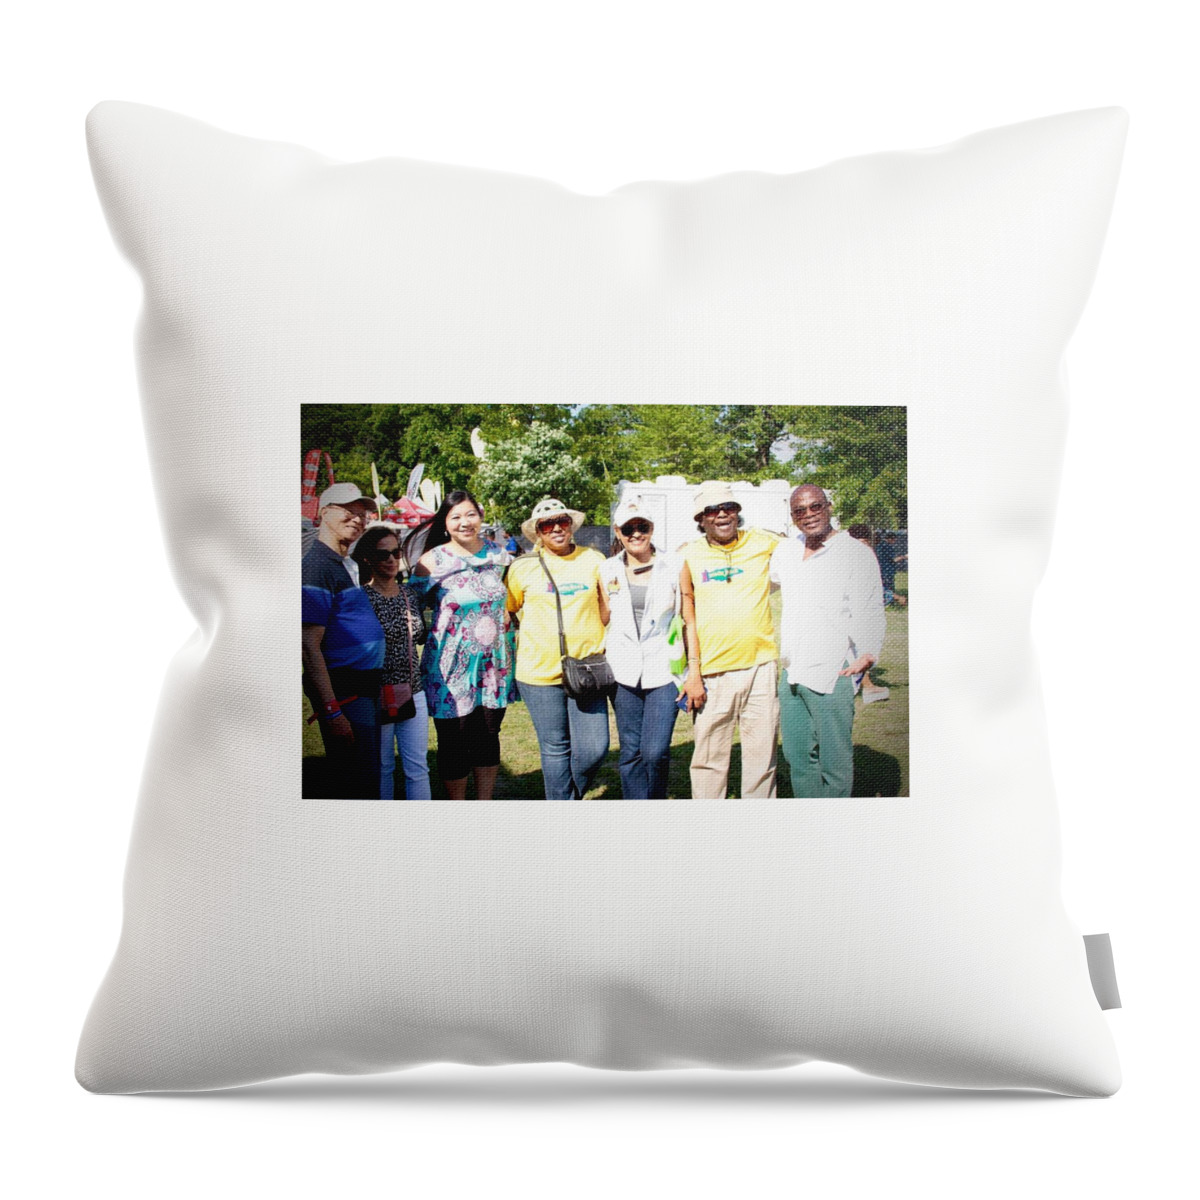  Throw Pillow featuring the photograph The Dynasty by Trevor A Smith